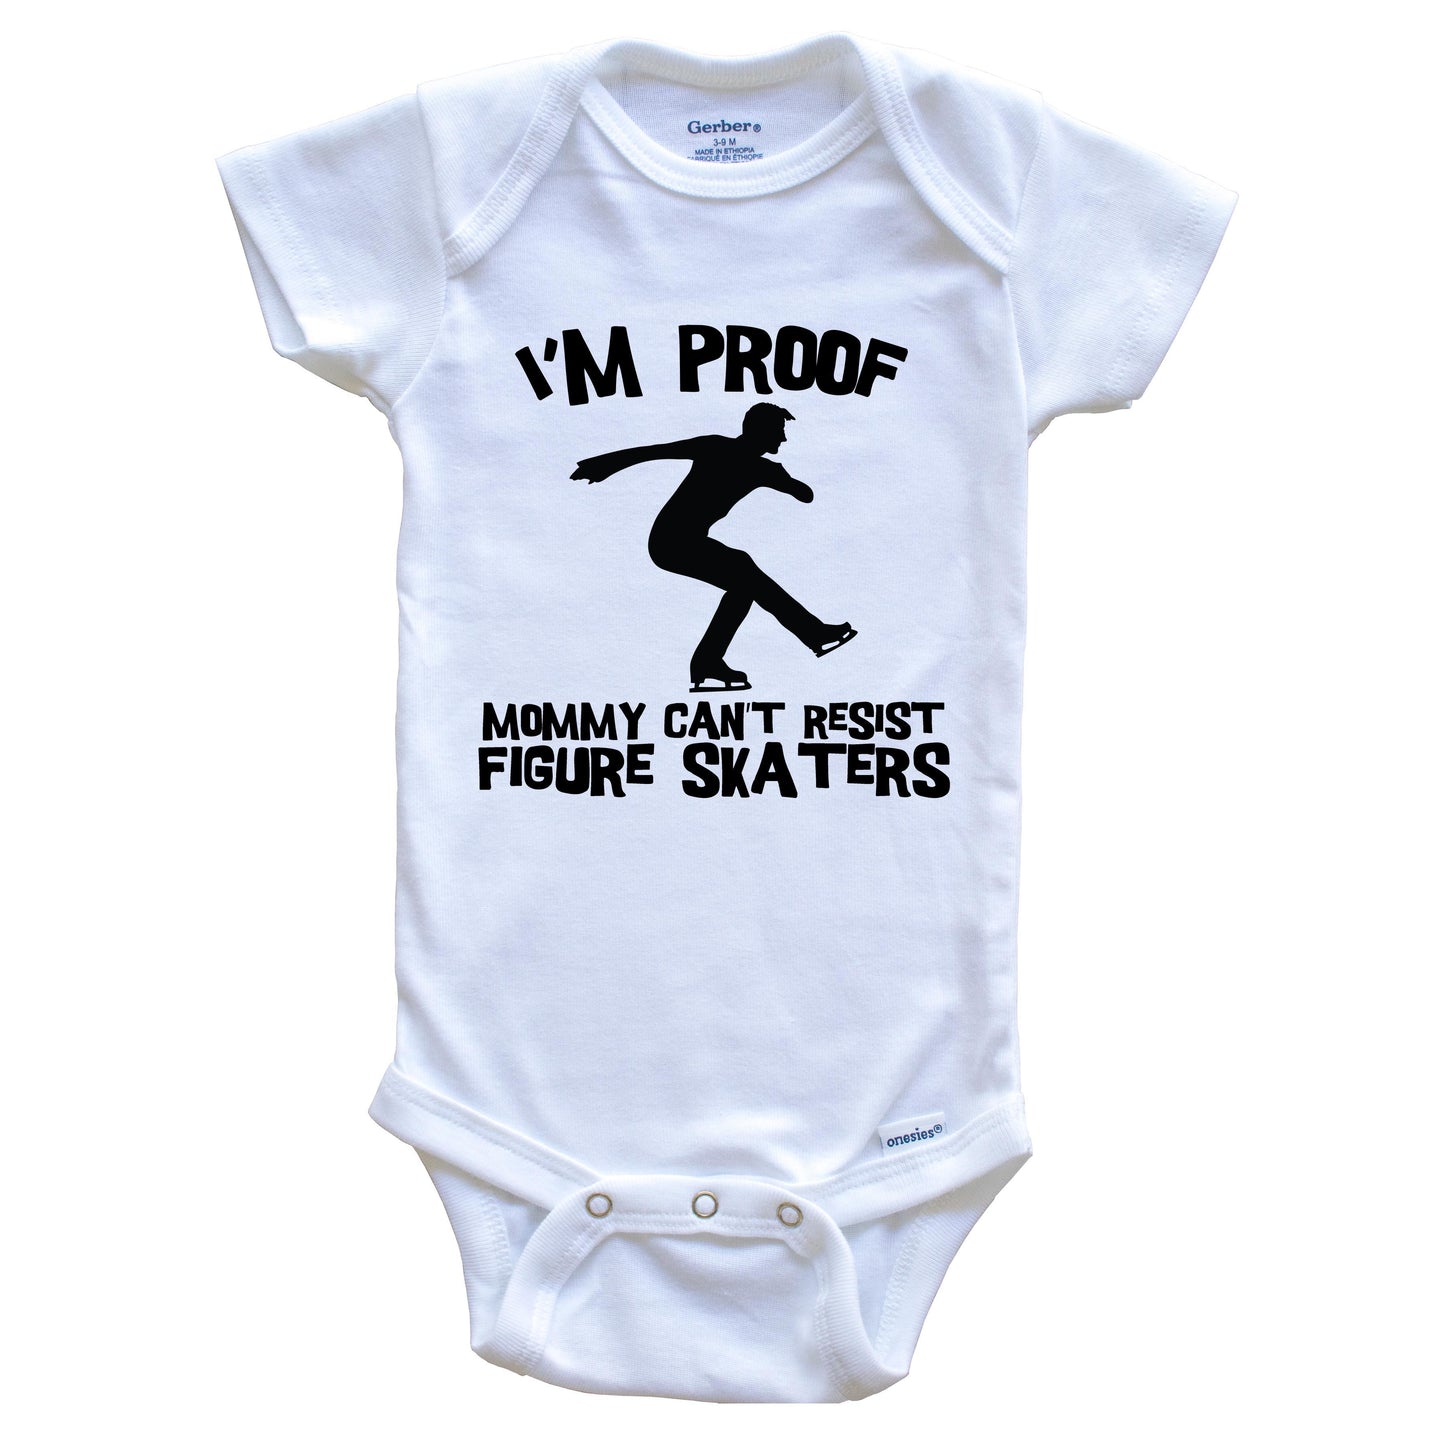 I'm Proof Mommy Can't Resist Figure Skaters Funny Figure Skating Baby Onesie